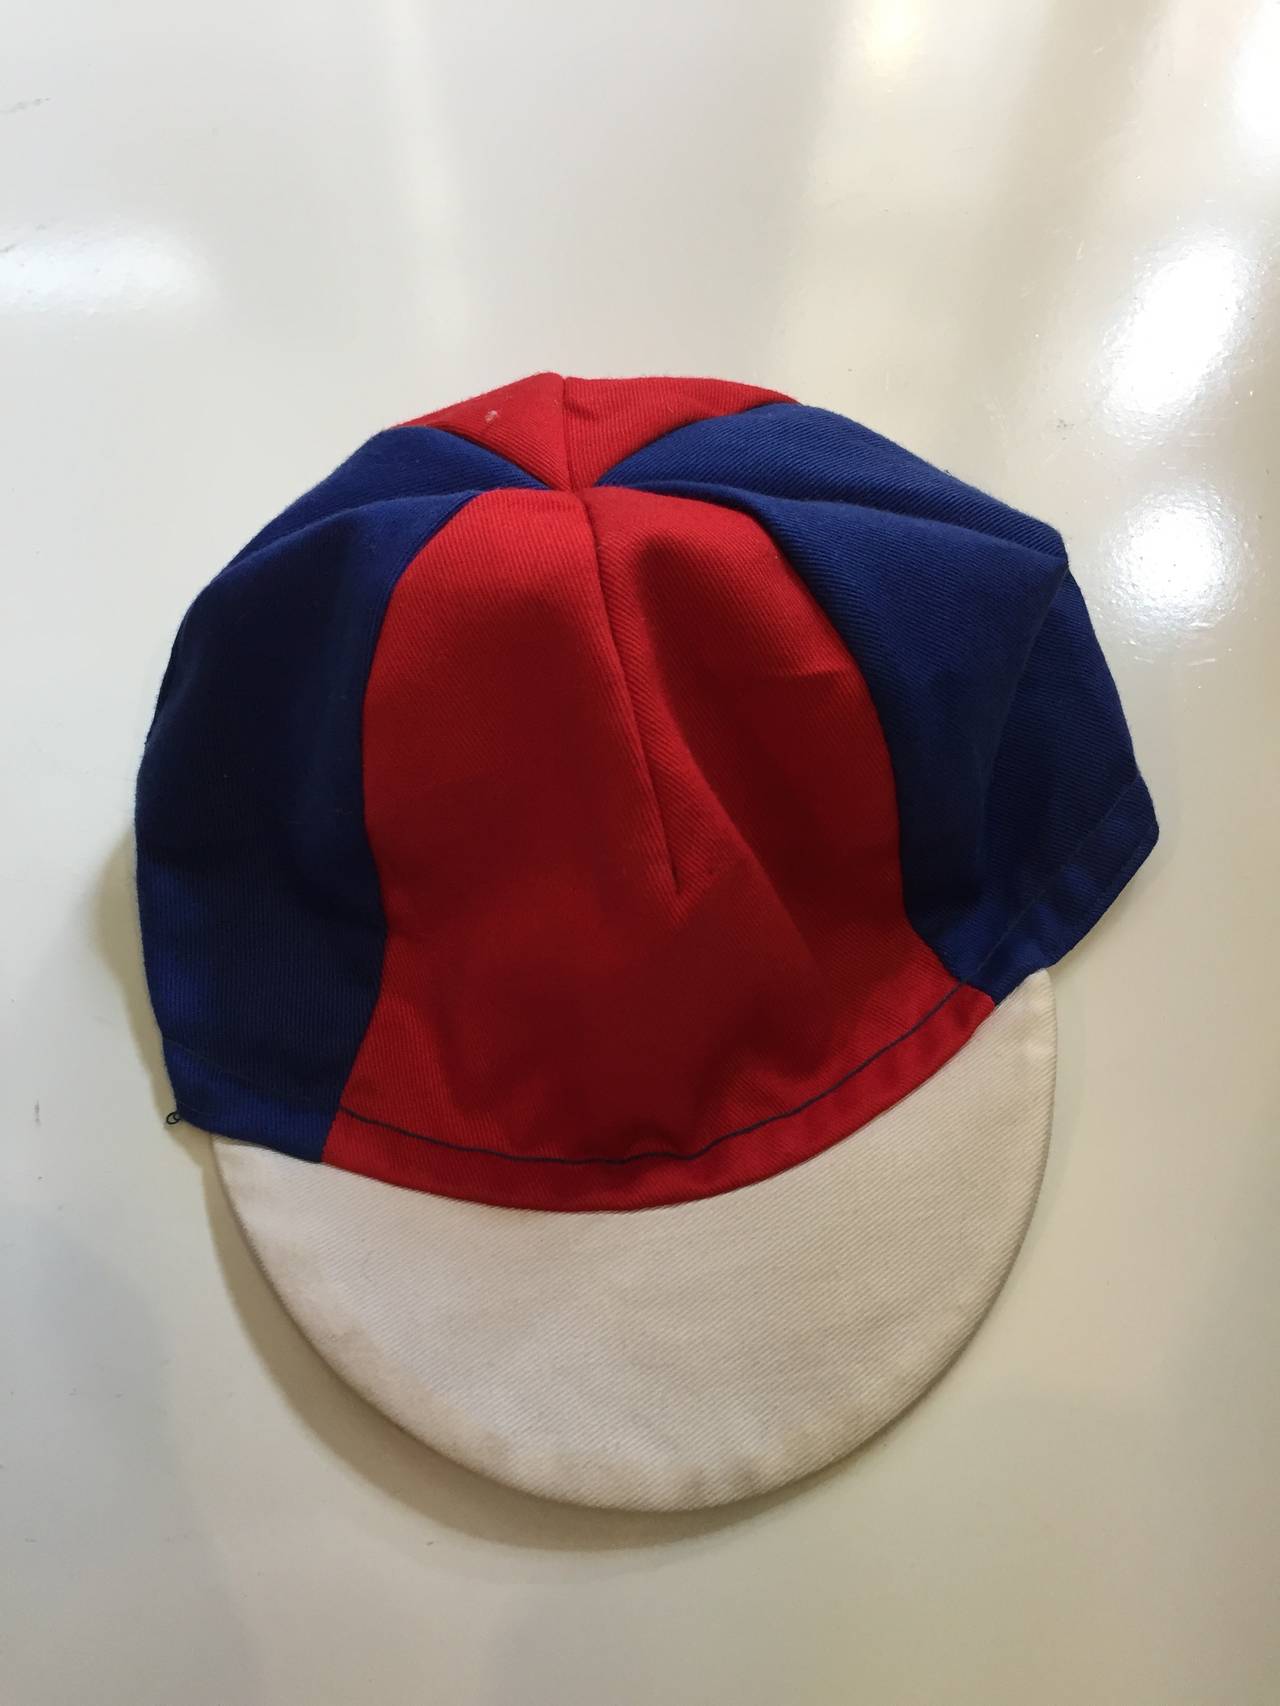 Patrick Kelly's 'Paris '1989 personal cap. This is from the private collection of Carol Martin who was Patrick Kelly's friend & model during the 70s & 80s. This 'Paris' cap was given to Carol by Patrick Kelly just after she walked the runway for his